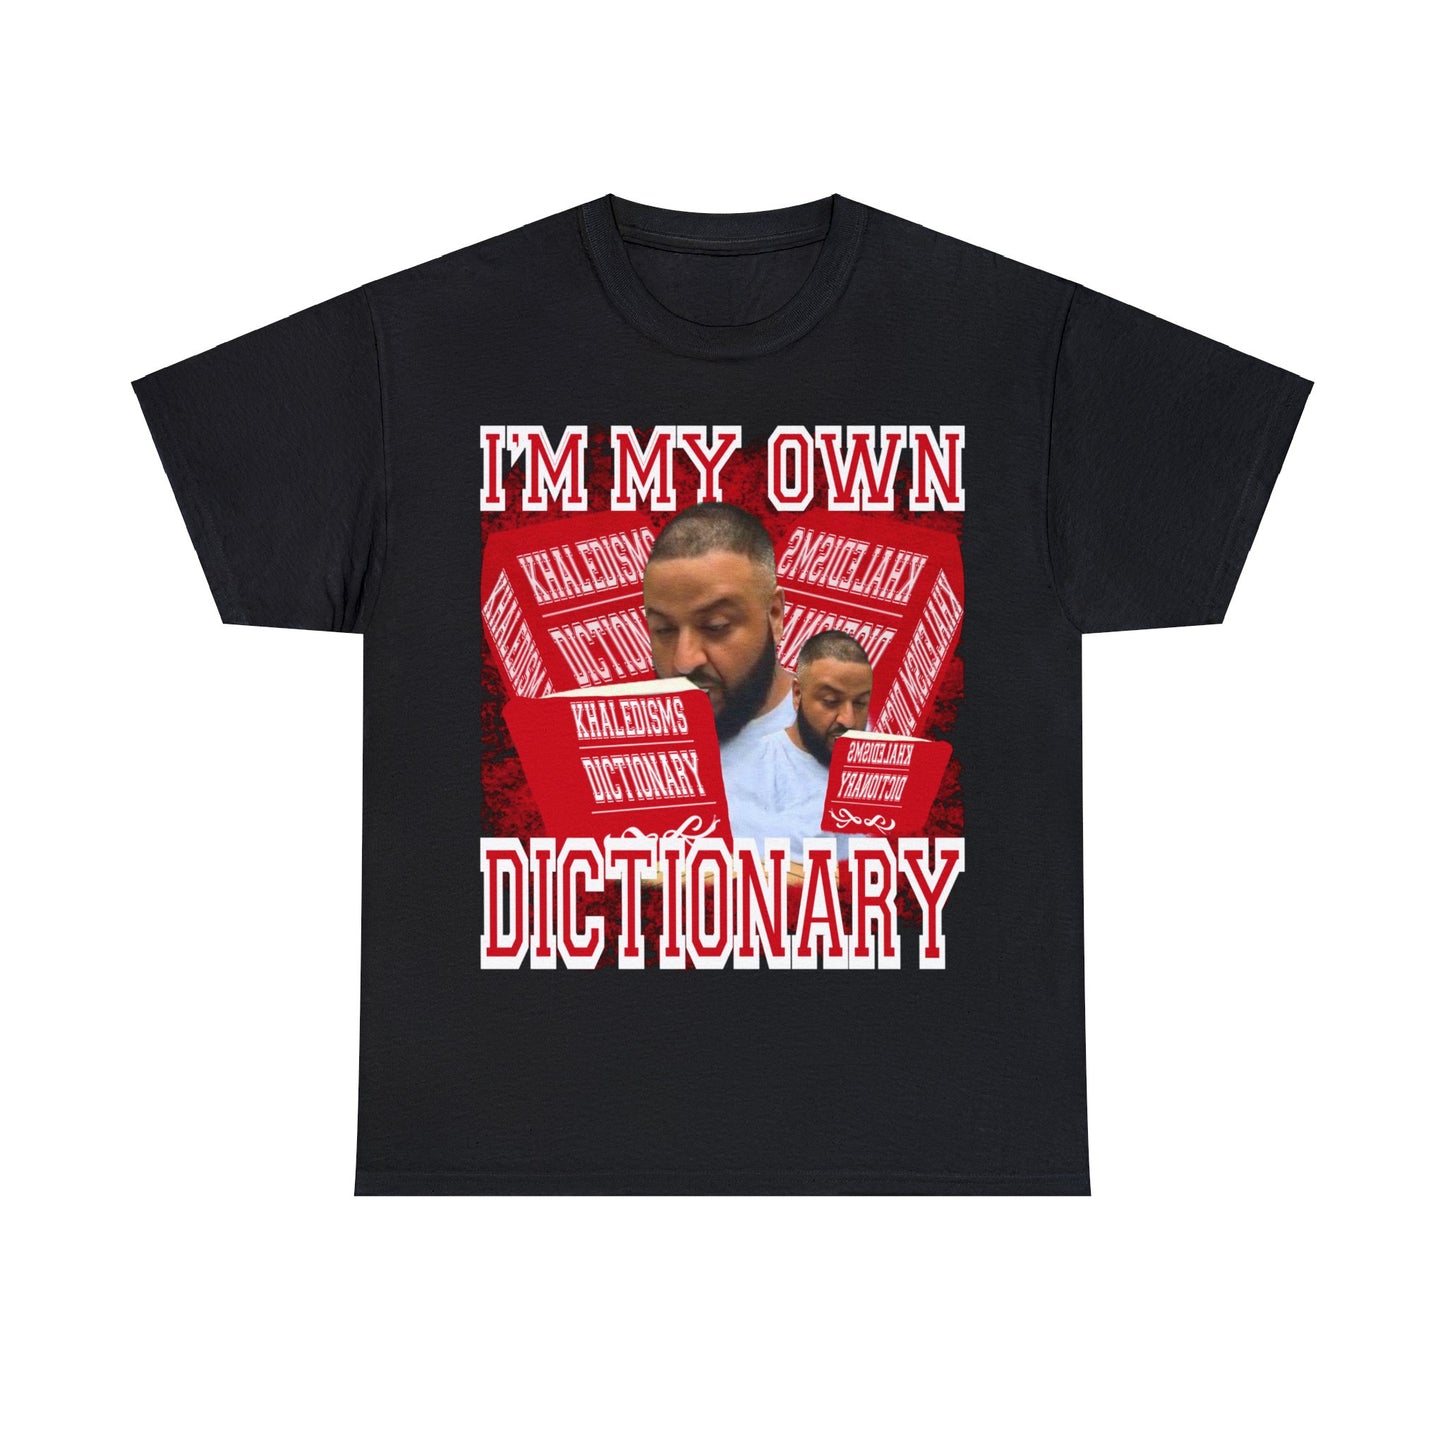 I’M MY OWN DICTIONARY